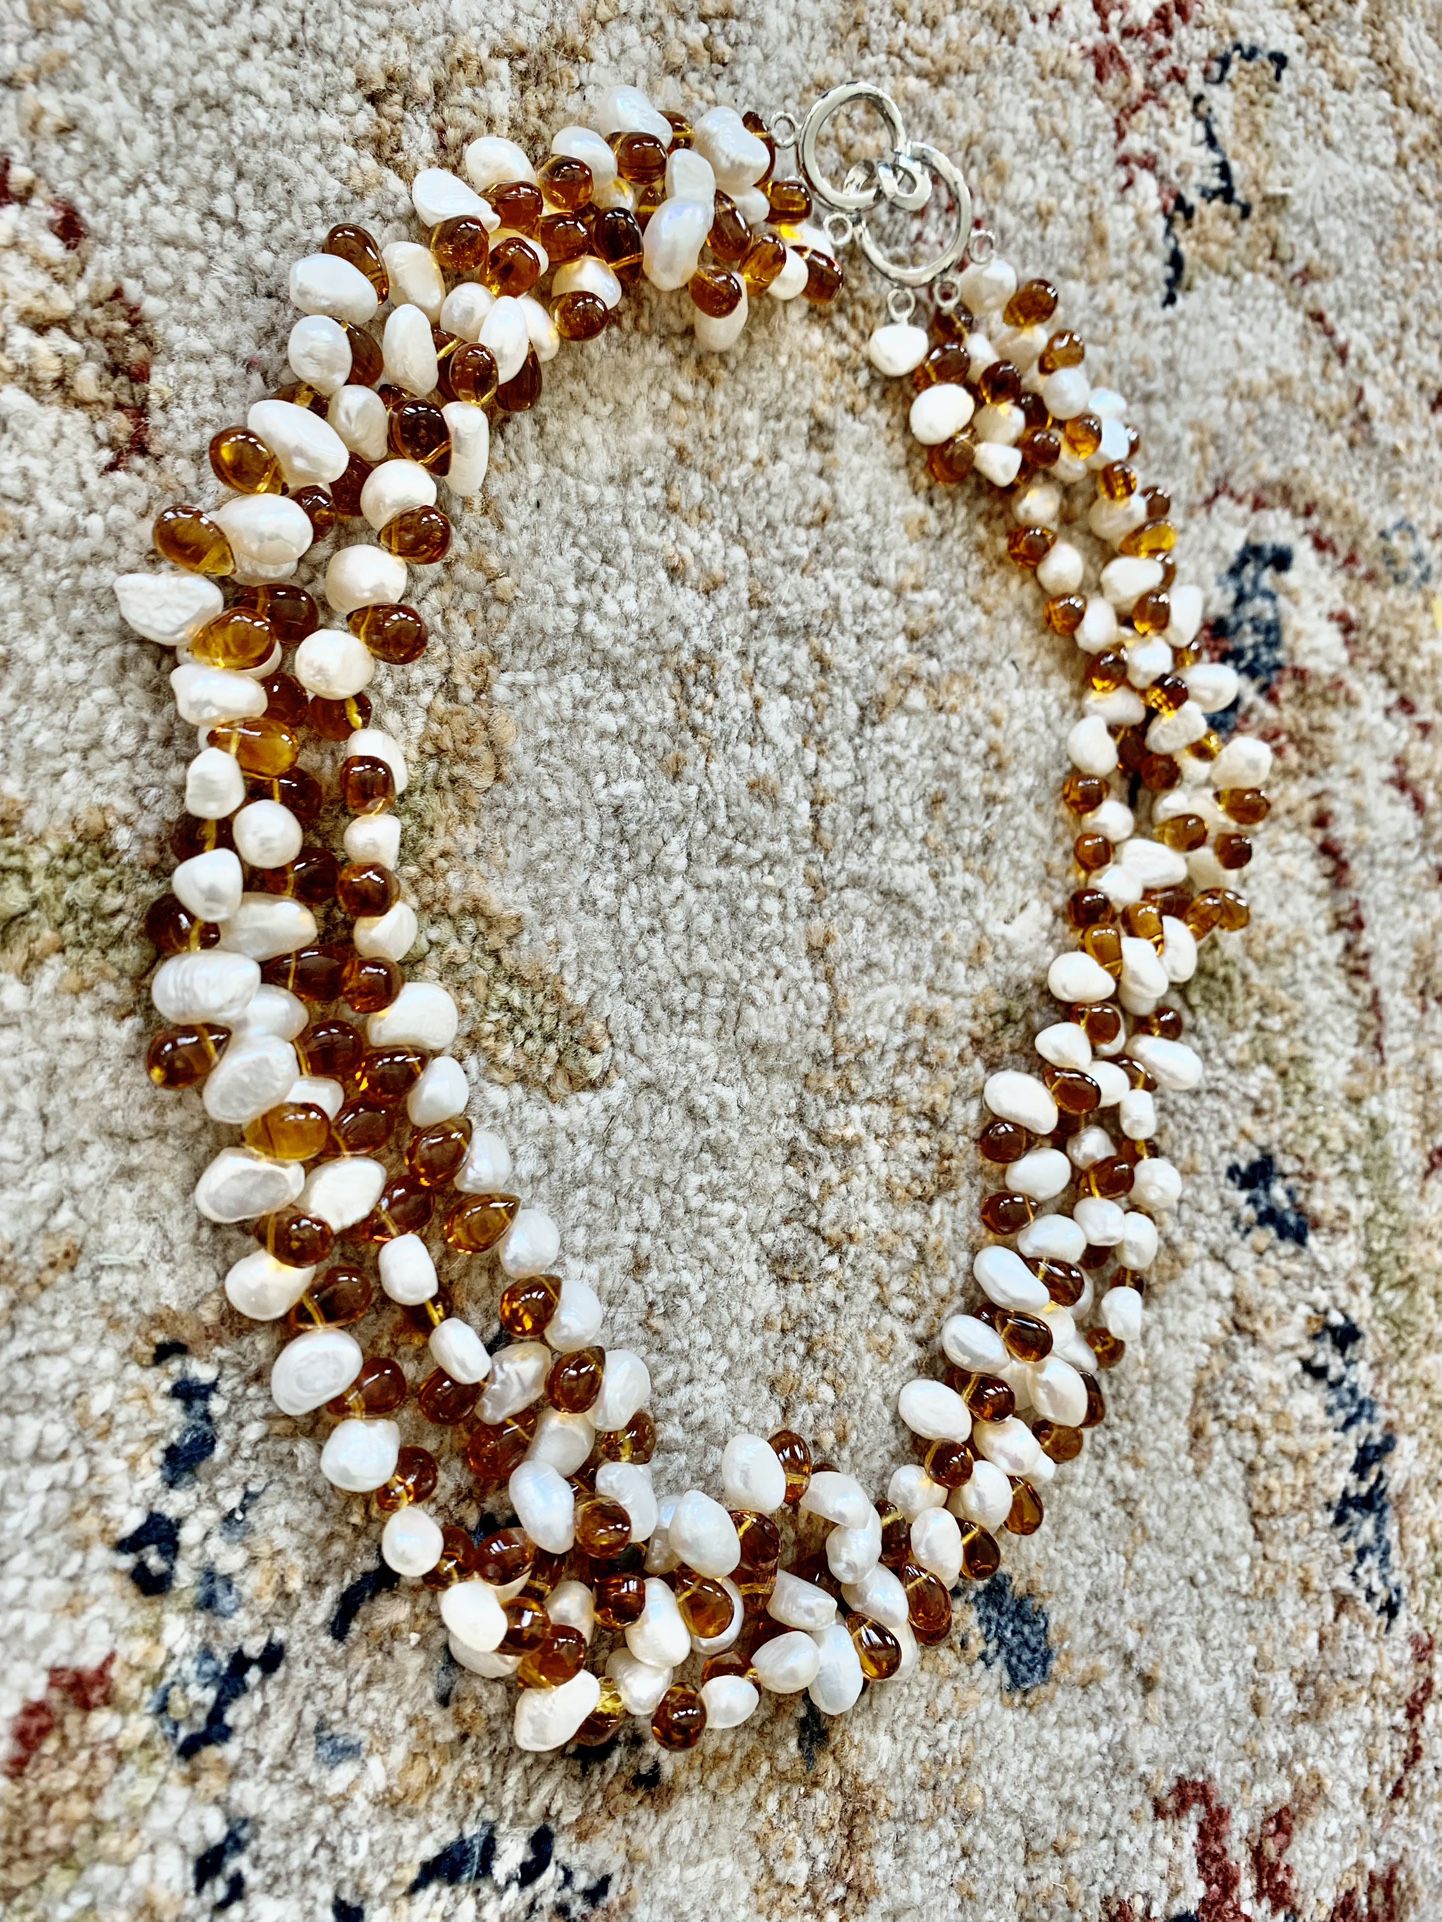  A Lovely Cascade Of Pearls  & Amber Beads